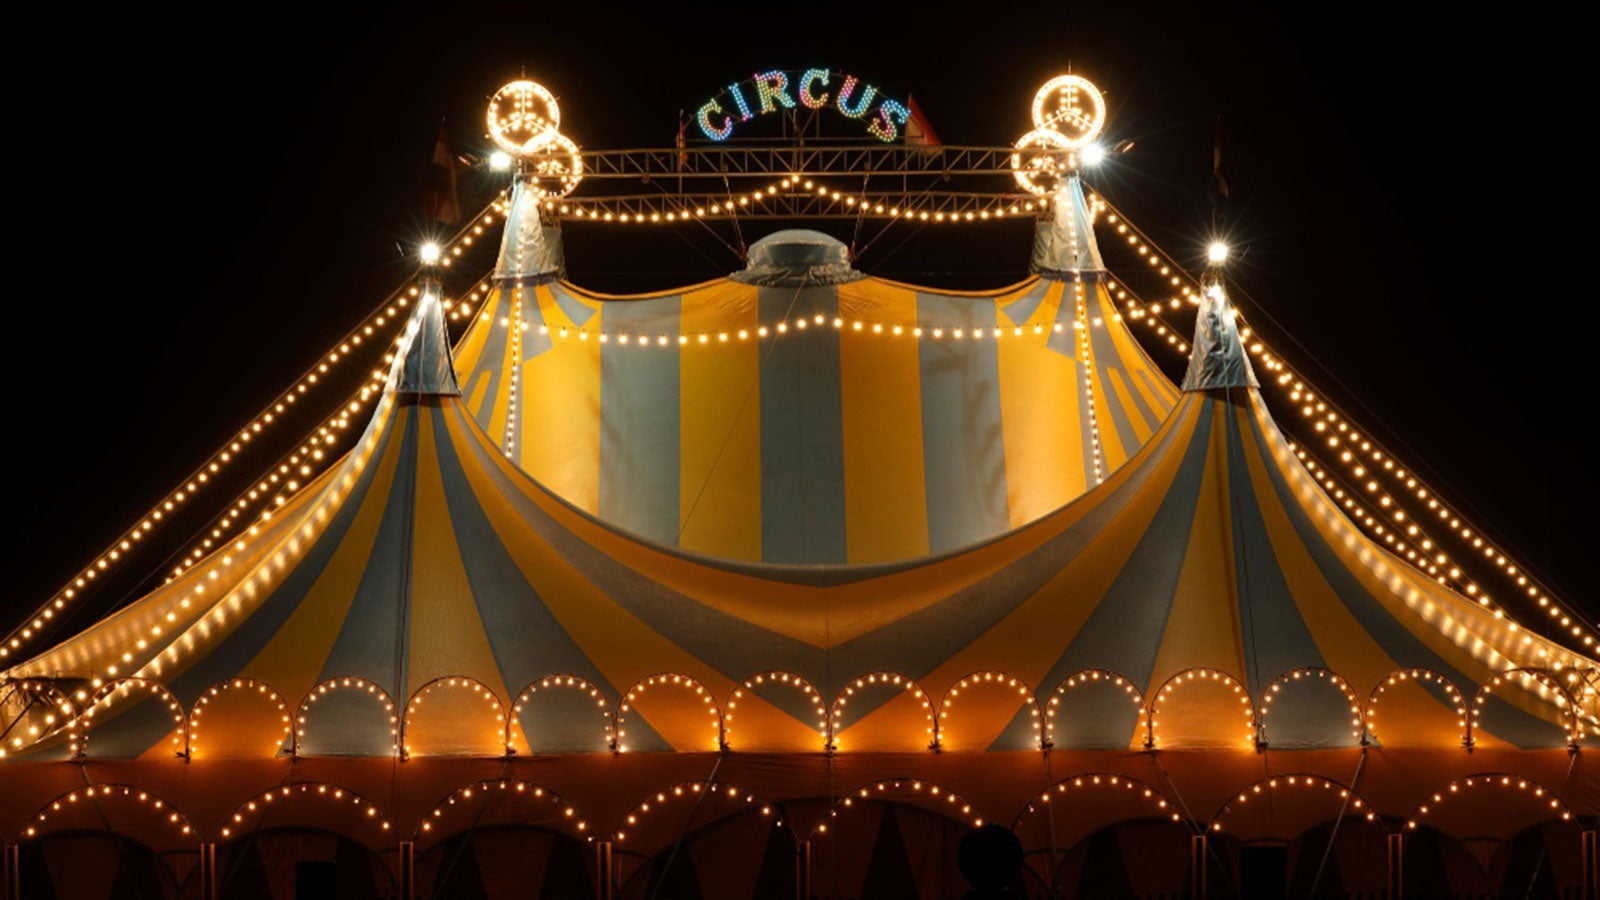 Blue and yellow circus tent with a light up circus sign on top at night